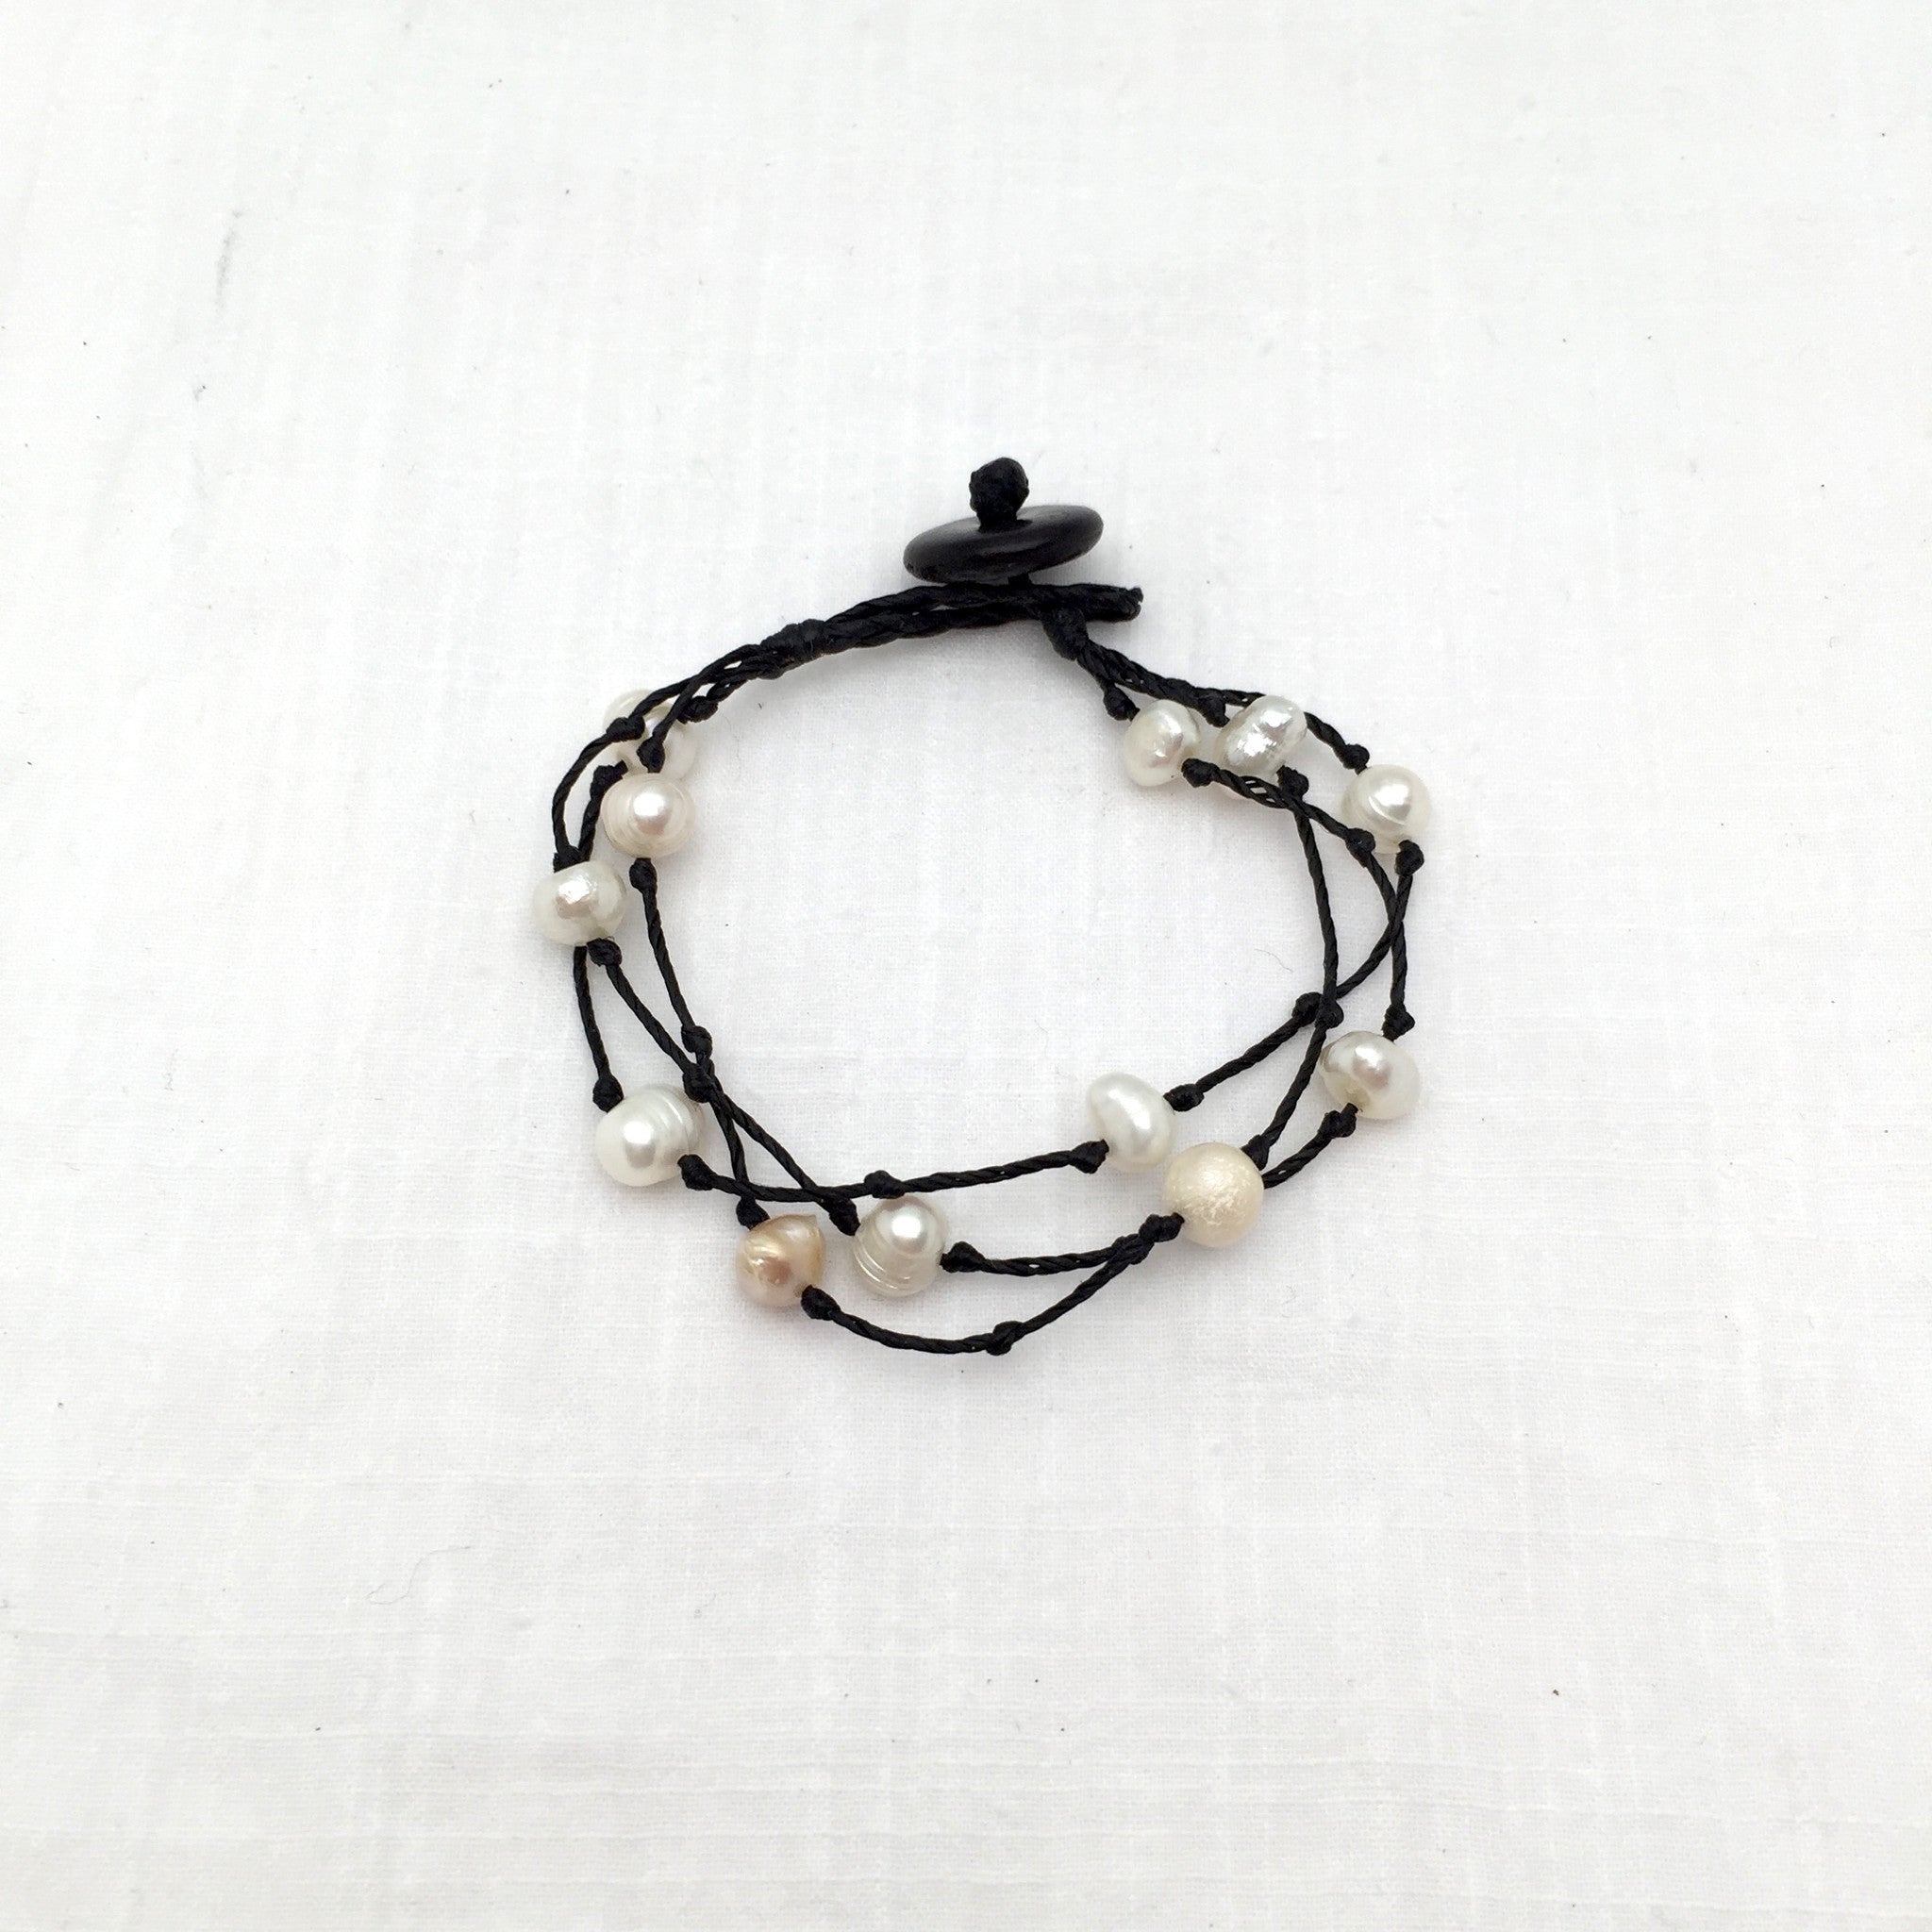 Maria Knotted Pearl Bracelet